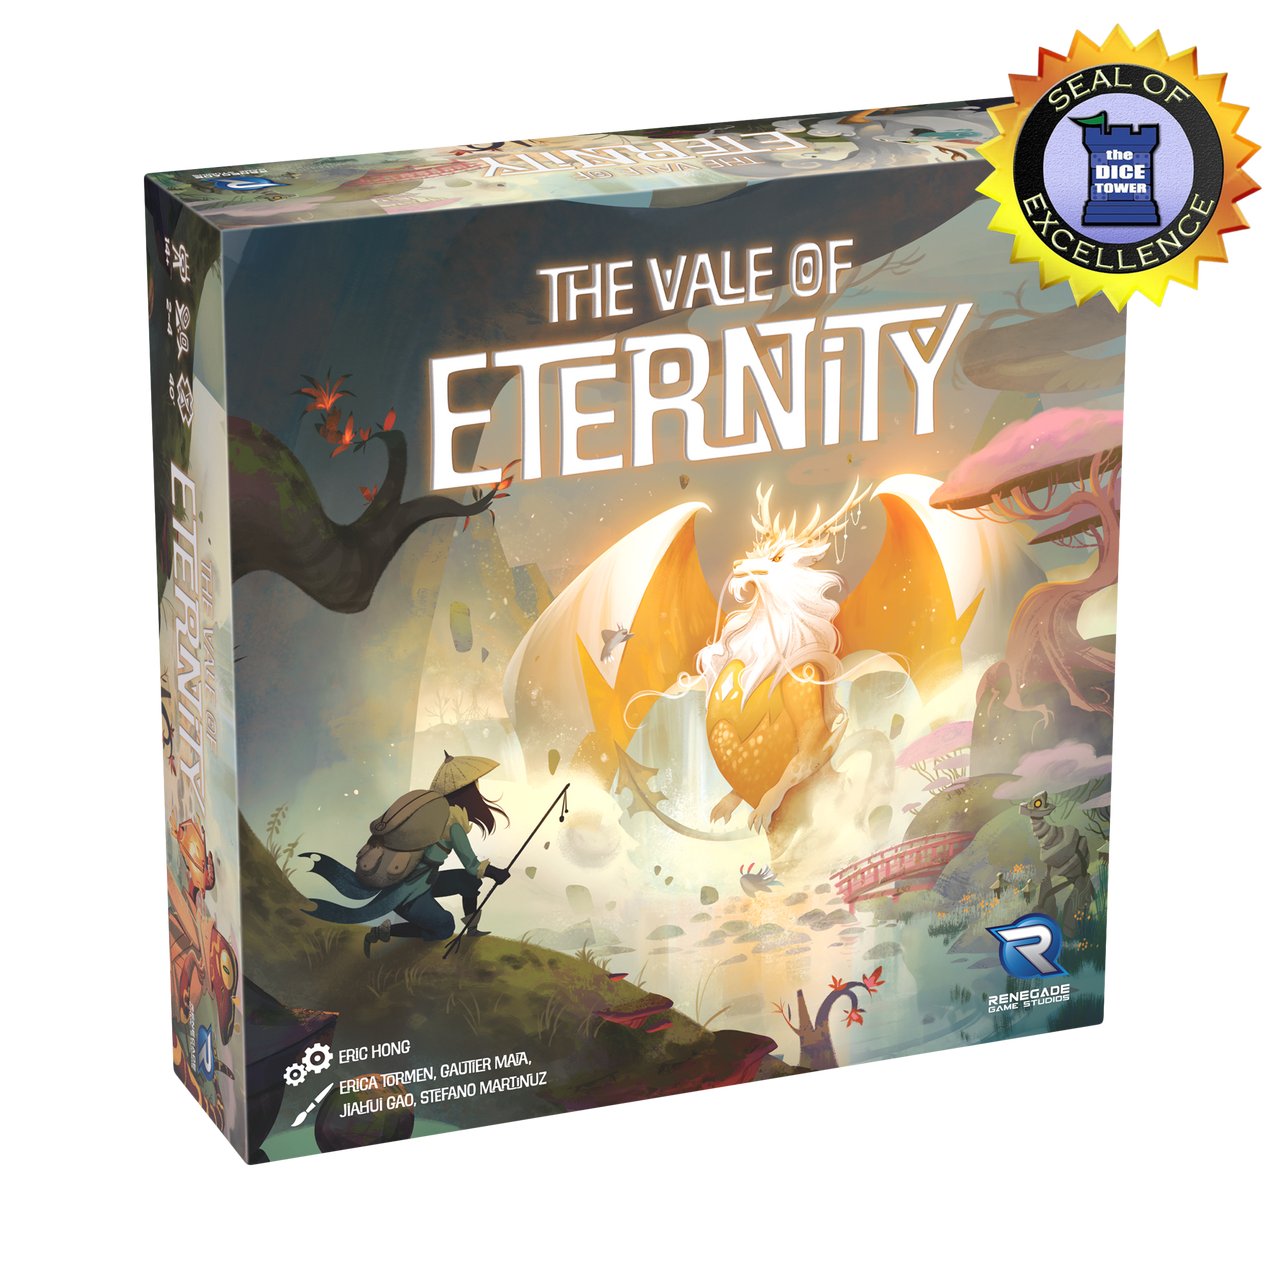 THE VALE OF ETERNITY